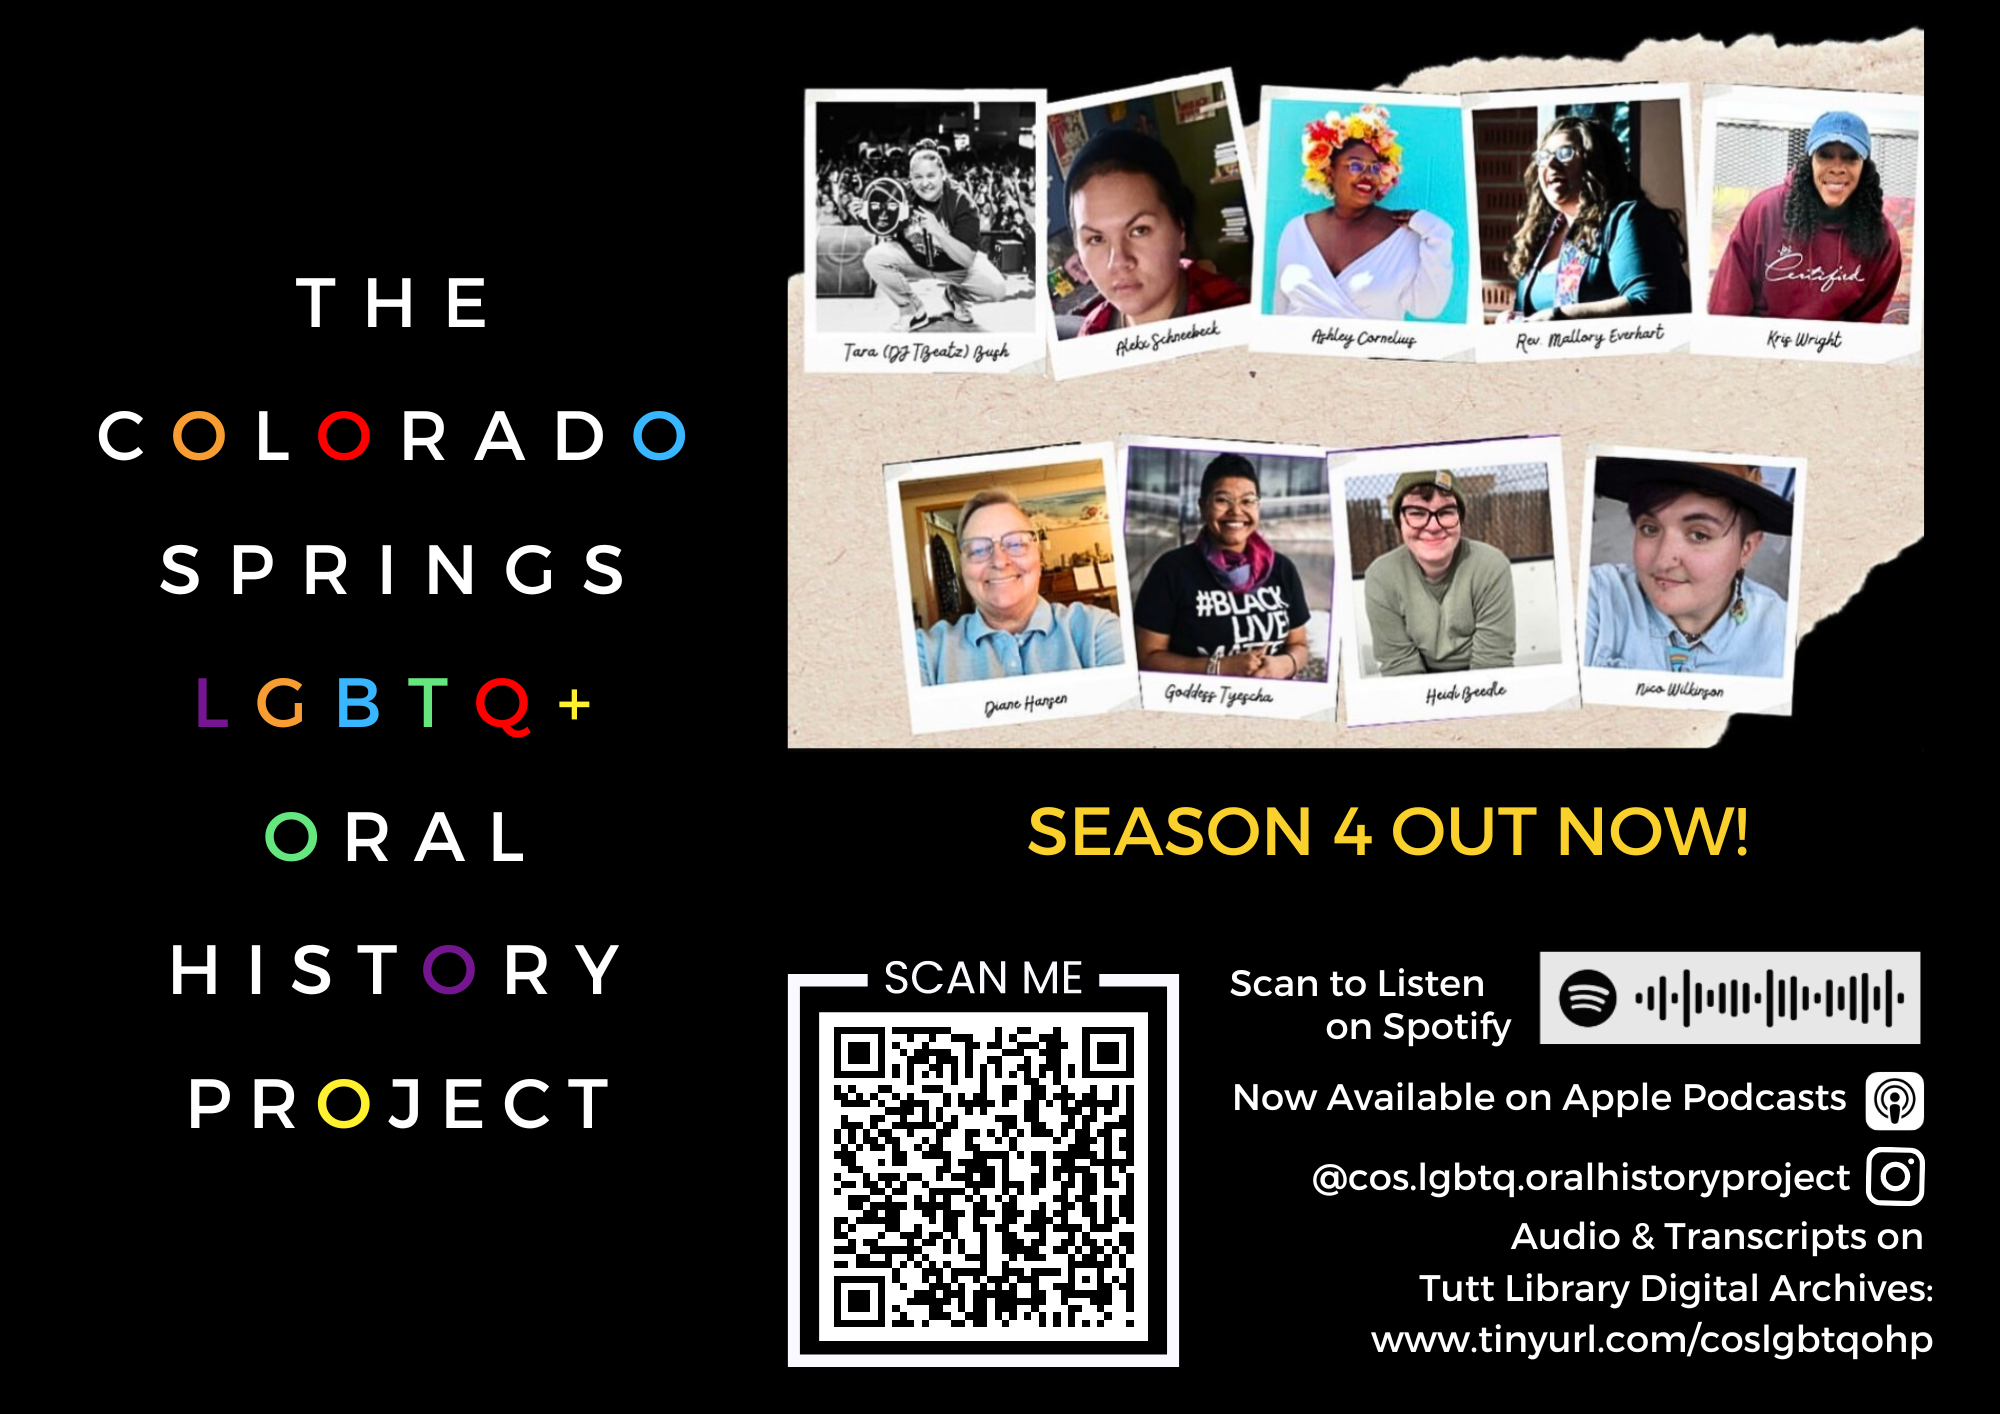 The Colorado Springs LGBTQ+ Oral History Project announces the release of its Fourth Season!